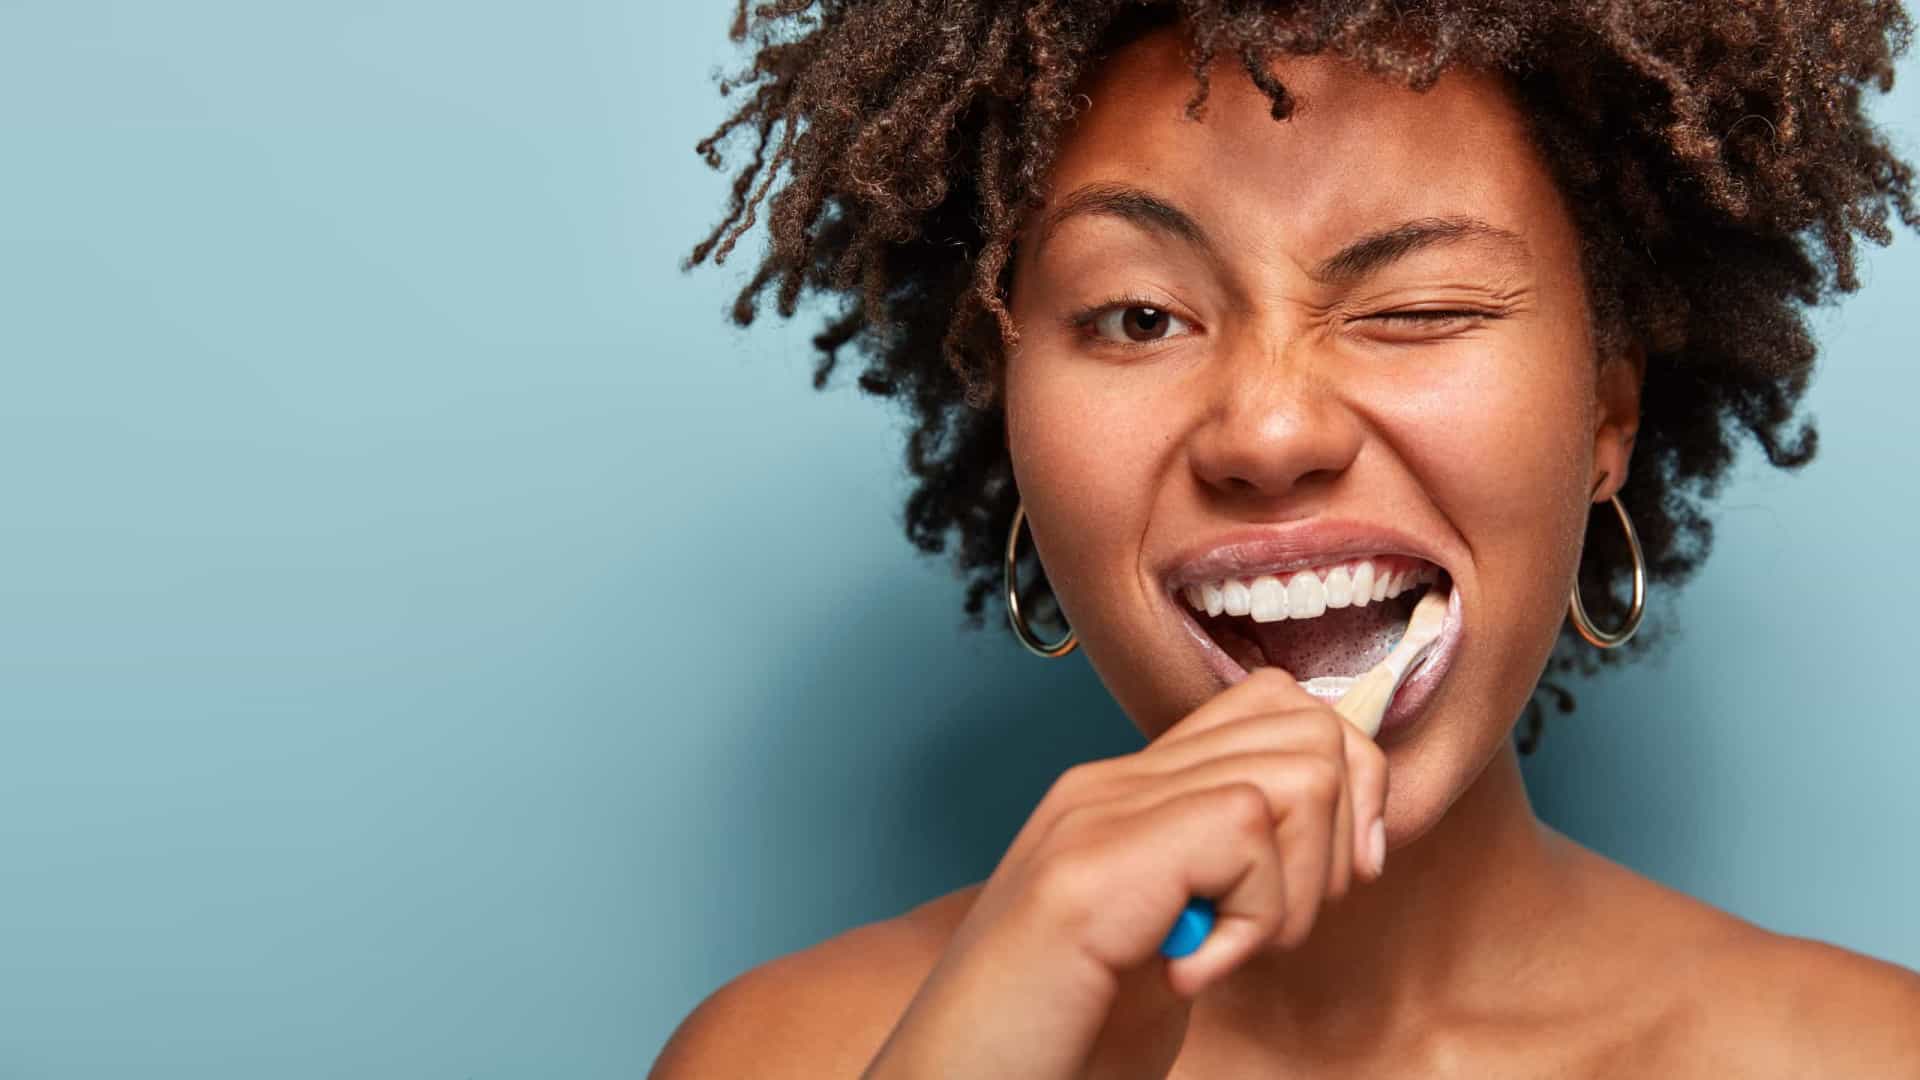 <p>It’s safe to say we’re all guilty of this. It does make sense, right? Well, it depends. If you have eaten recently, then sure, by all means brush your teeth. If not, it's best to avoid it.</p><p><a href="https://www.msn.com/en-us/community/channel/vid-7xx8mnucu55yw63we9va2gwr7uihbxwc68fxqp25x6tg4ftibpra?cvid=94631541bc0f4f89bfd59158d696ad7e">Follow us and access great exclusive content everyday</a></p>